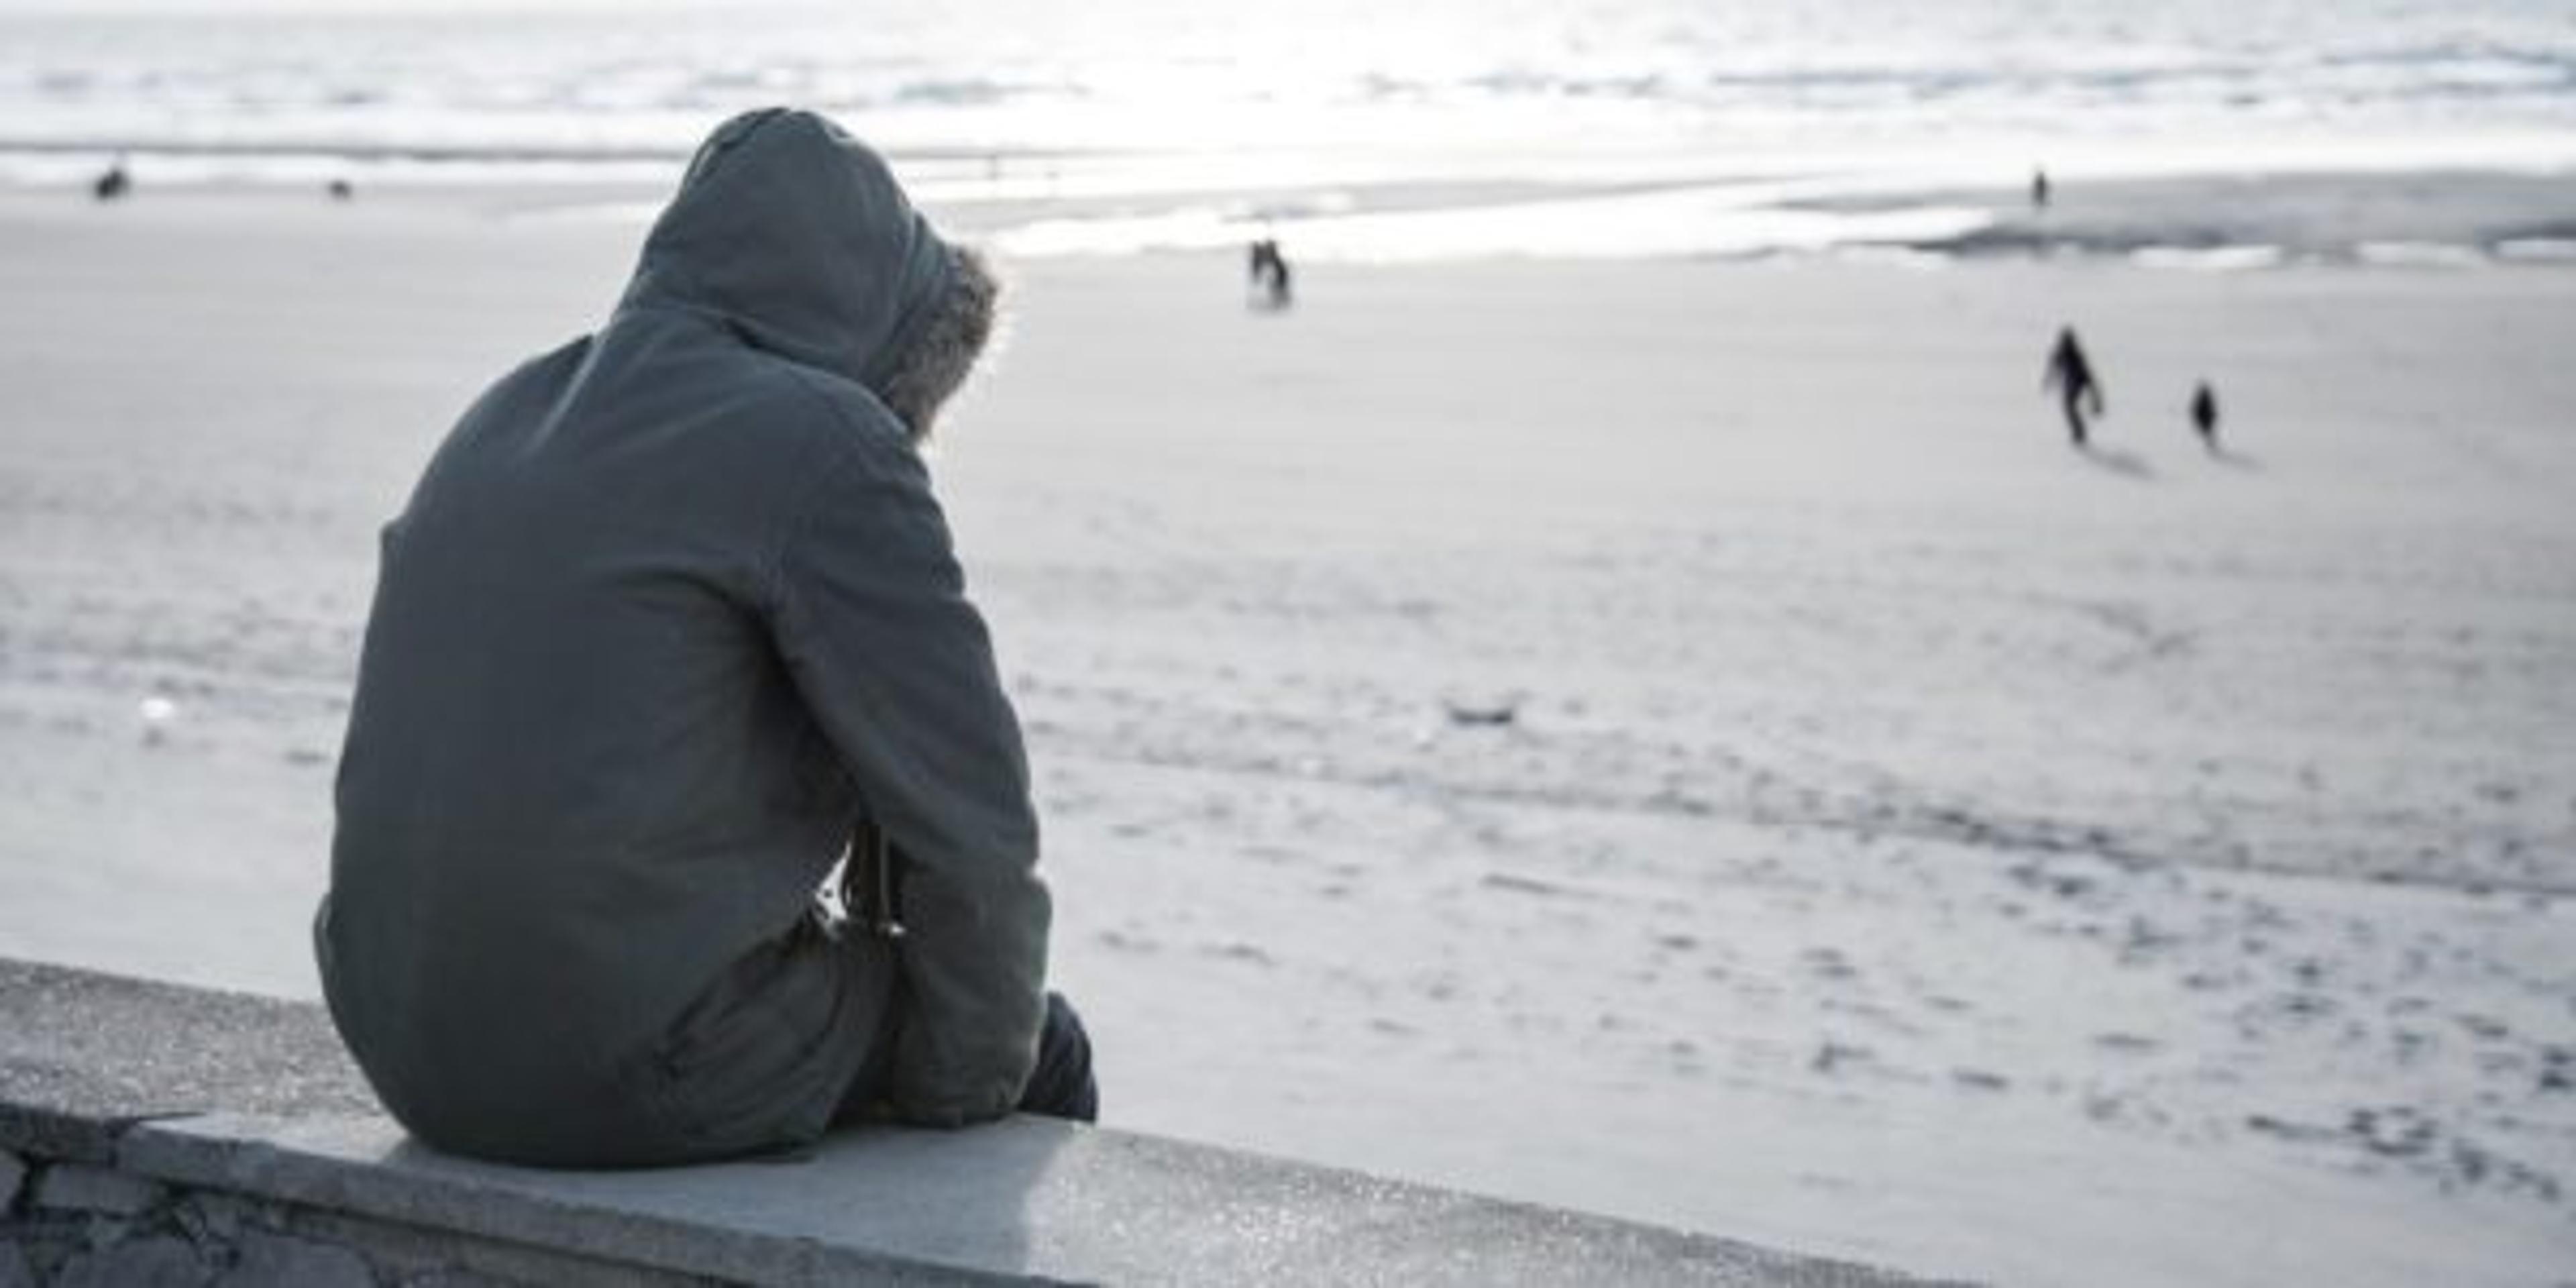 A person wearing a parka coat sits on a wall looking out at the sea